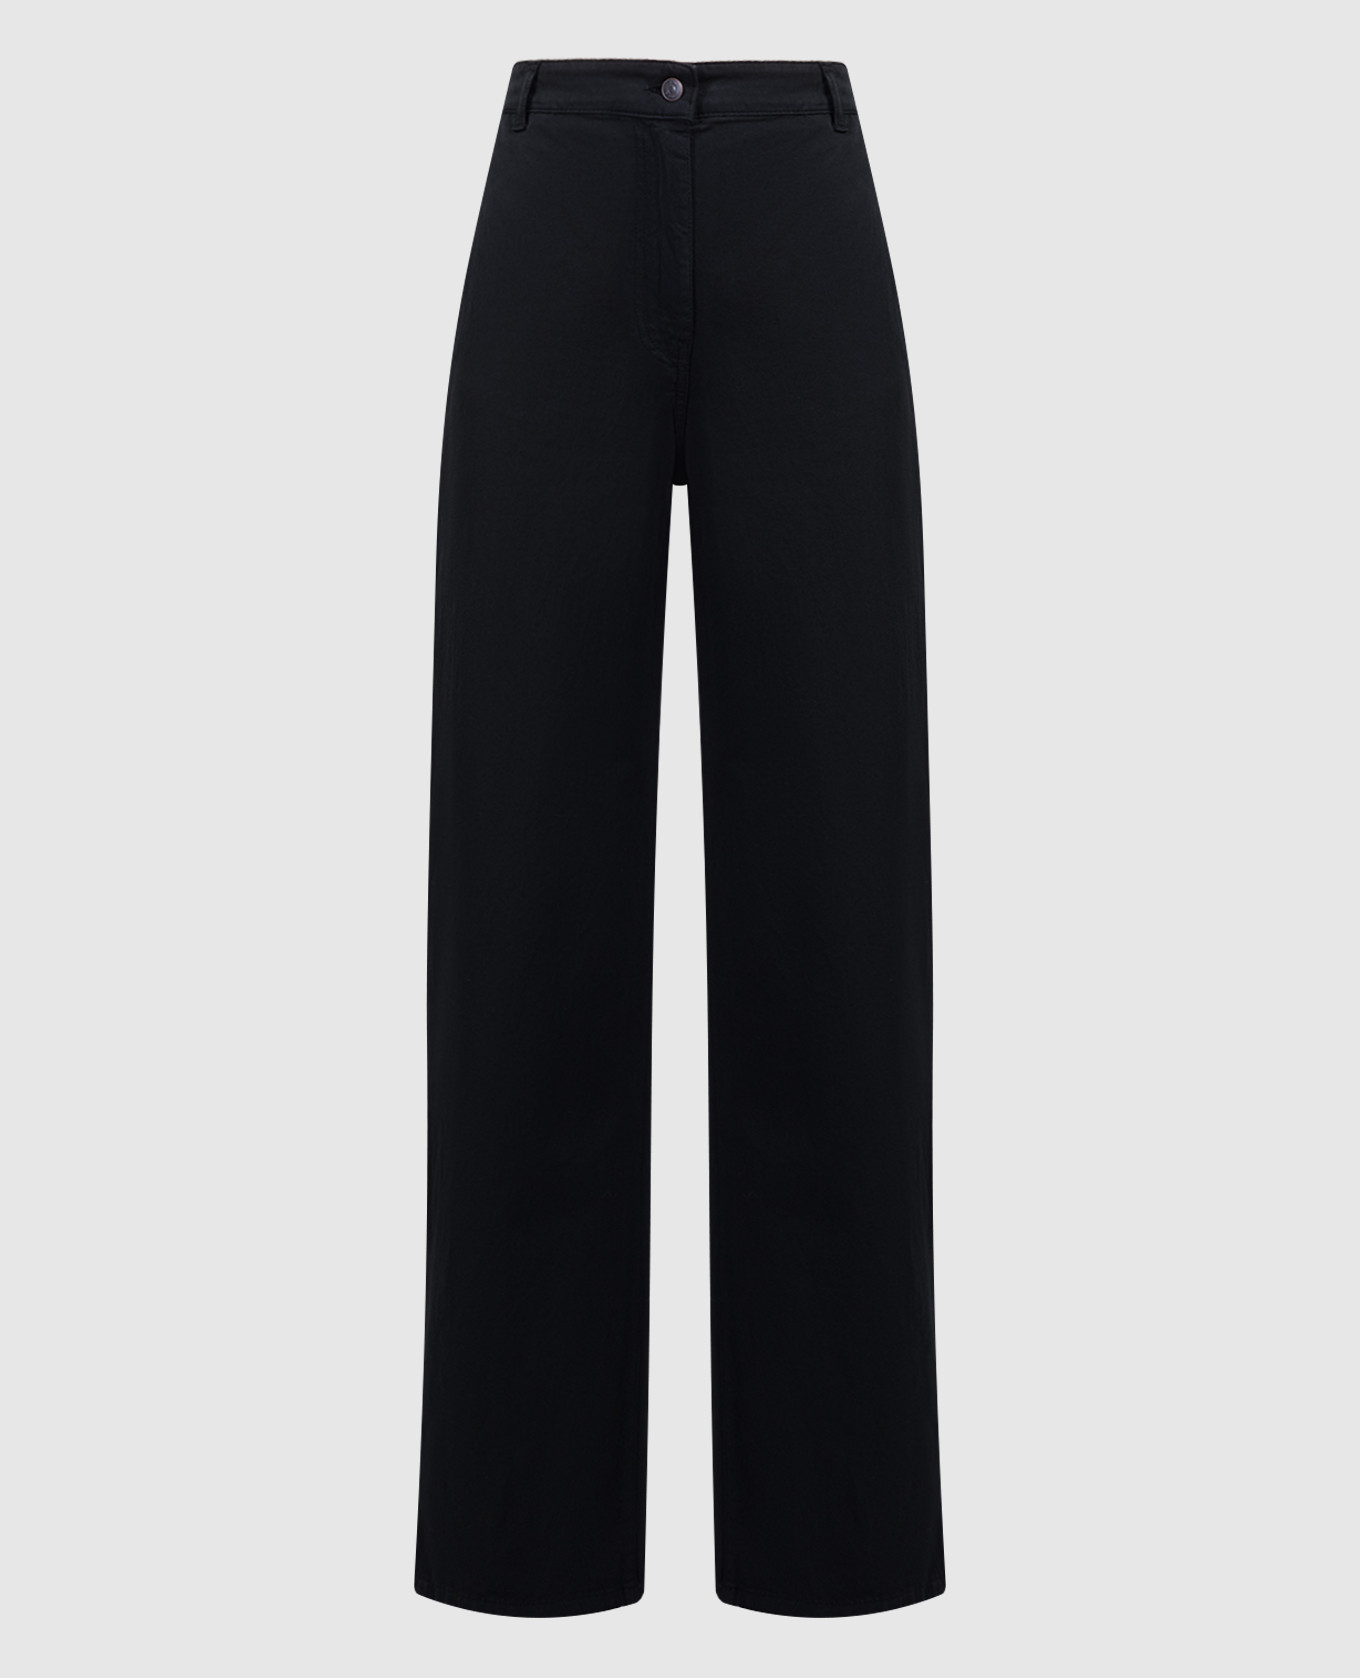 Delton black jeans made of wool